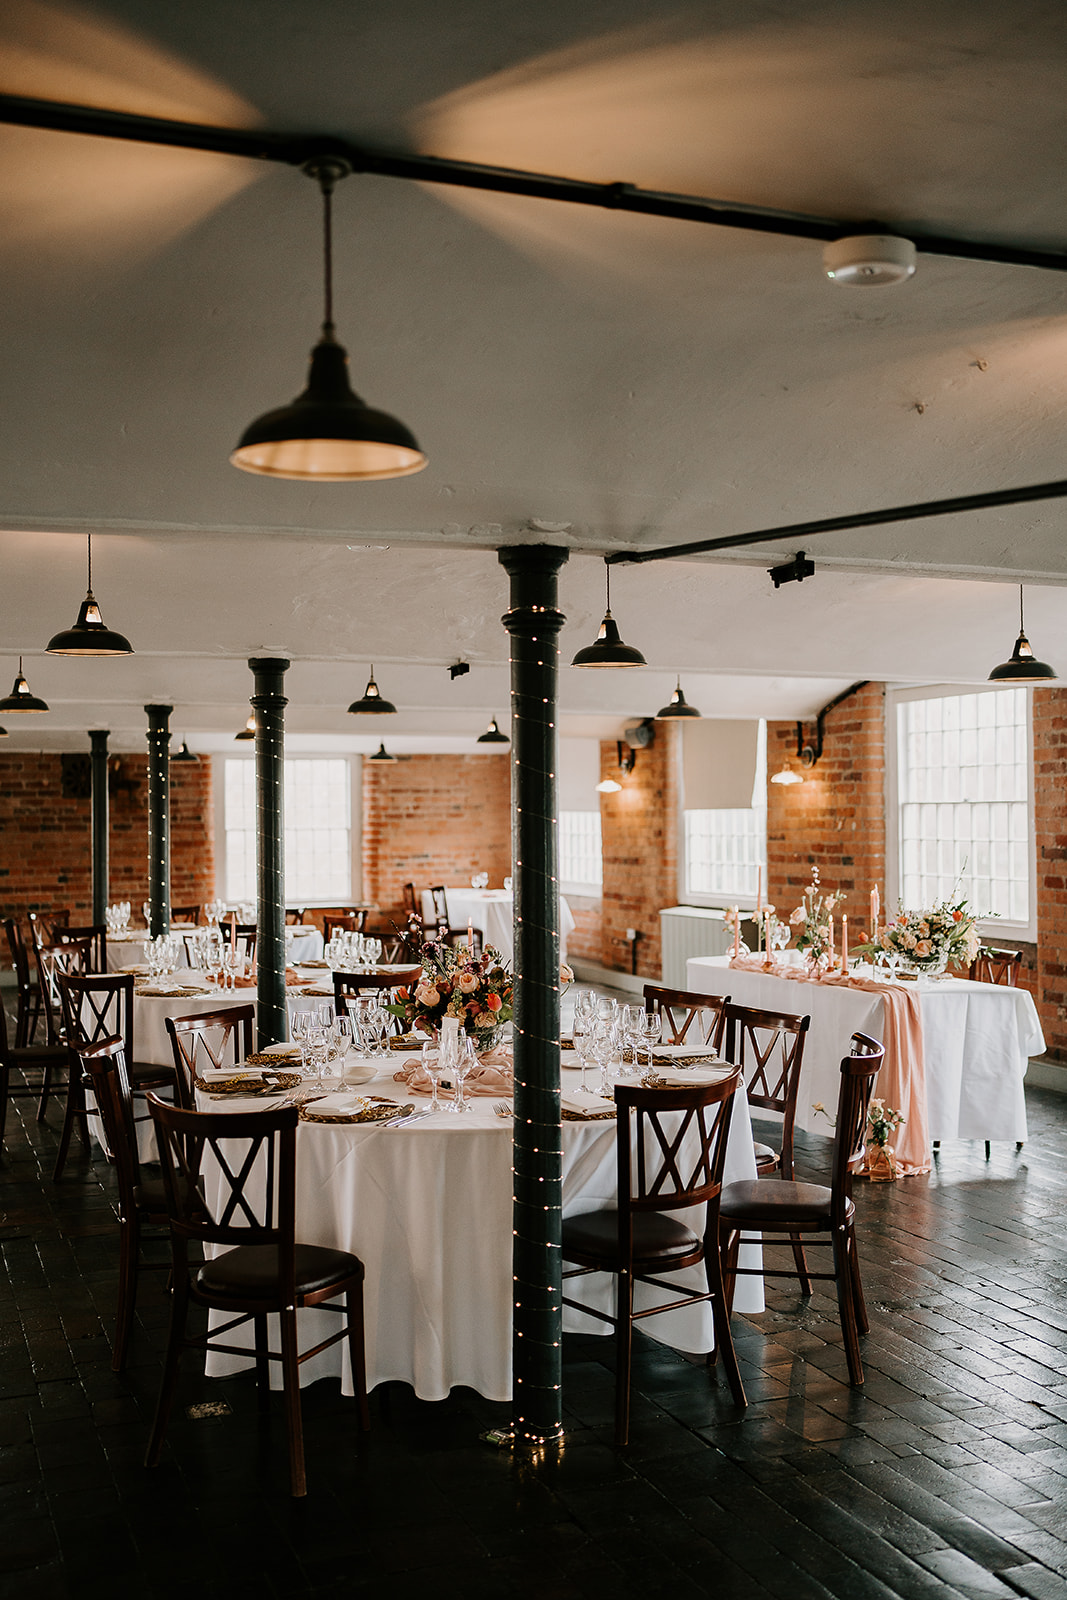 Spring Wedding Styling Inspiration | The West Mill Recommended Suppliers